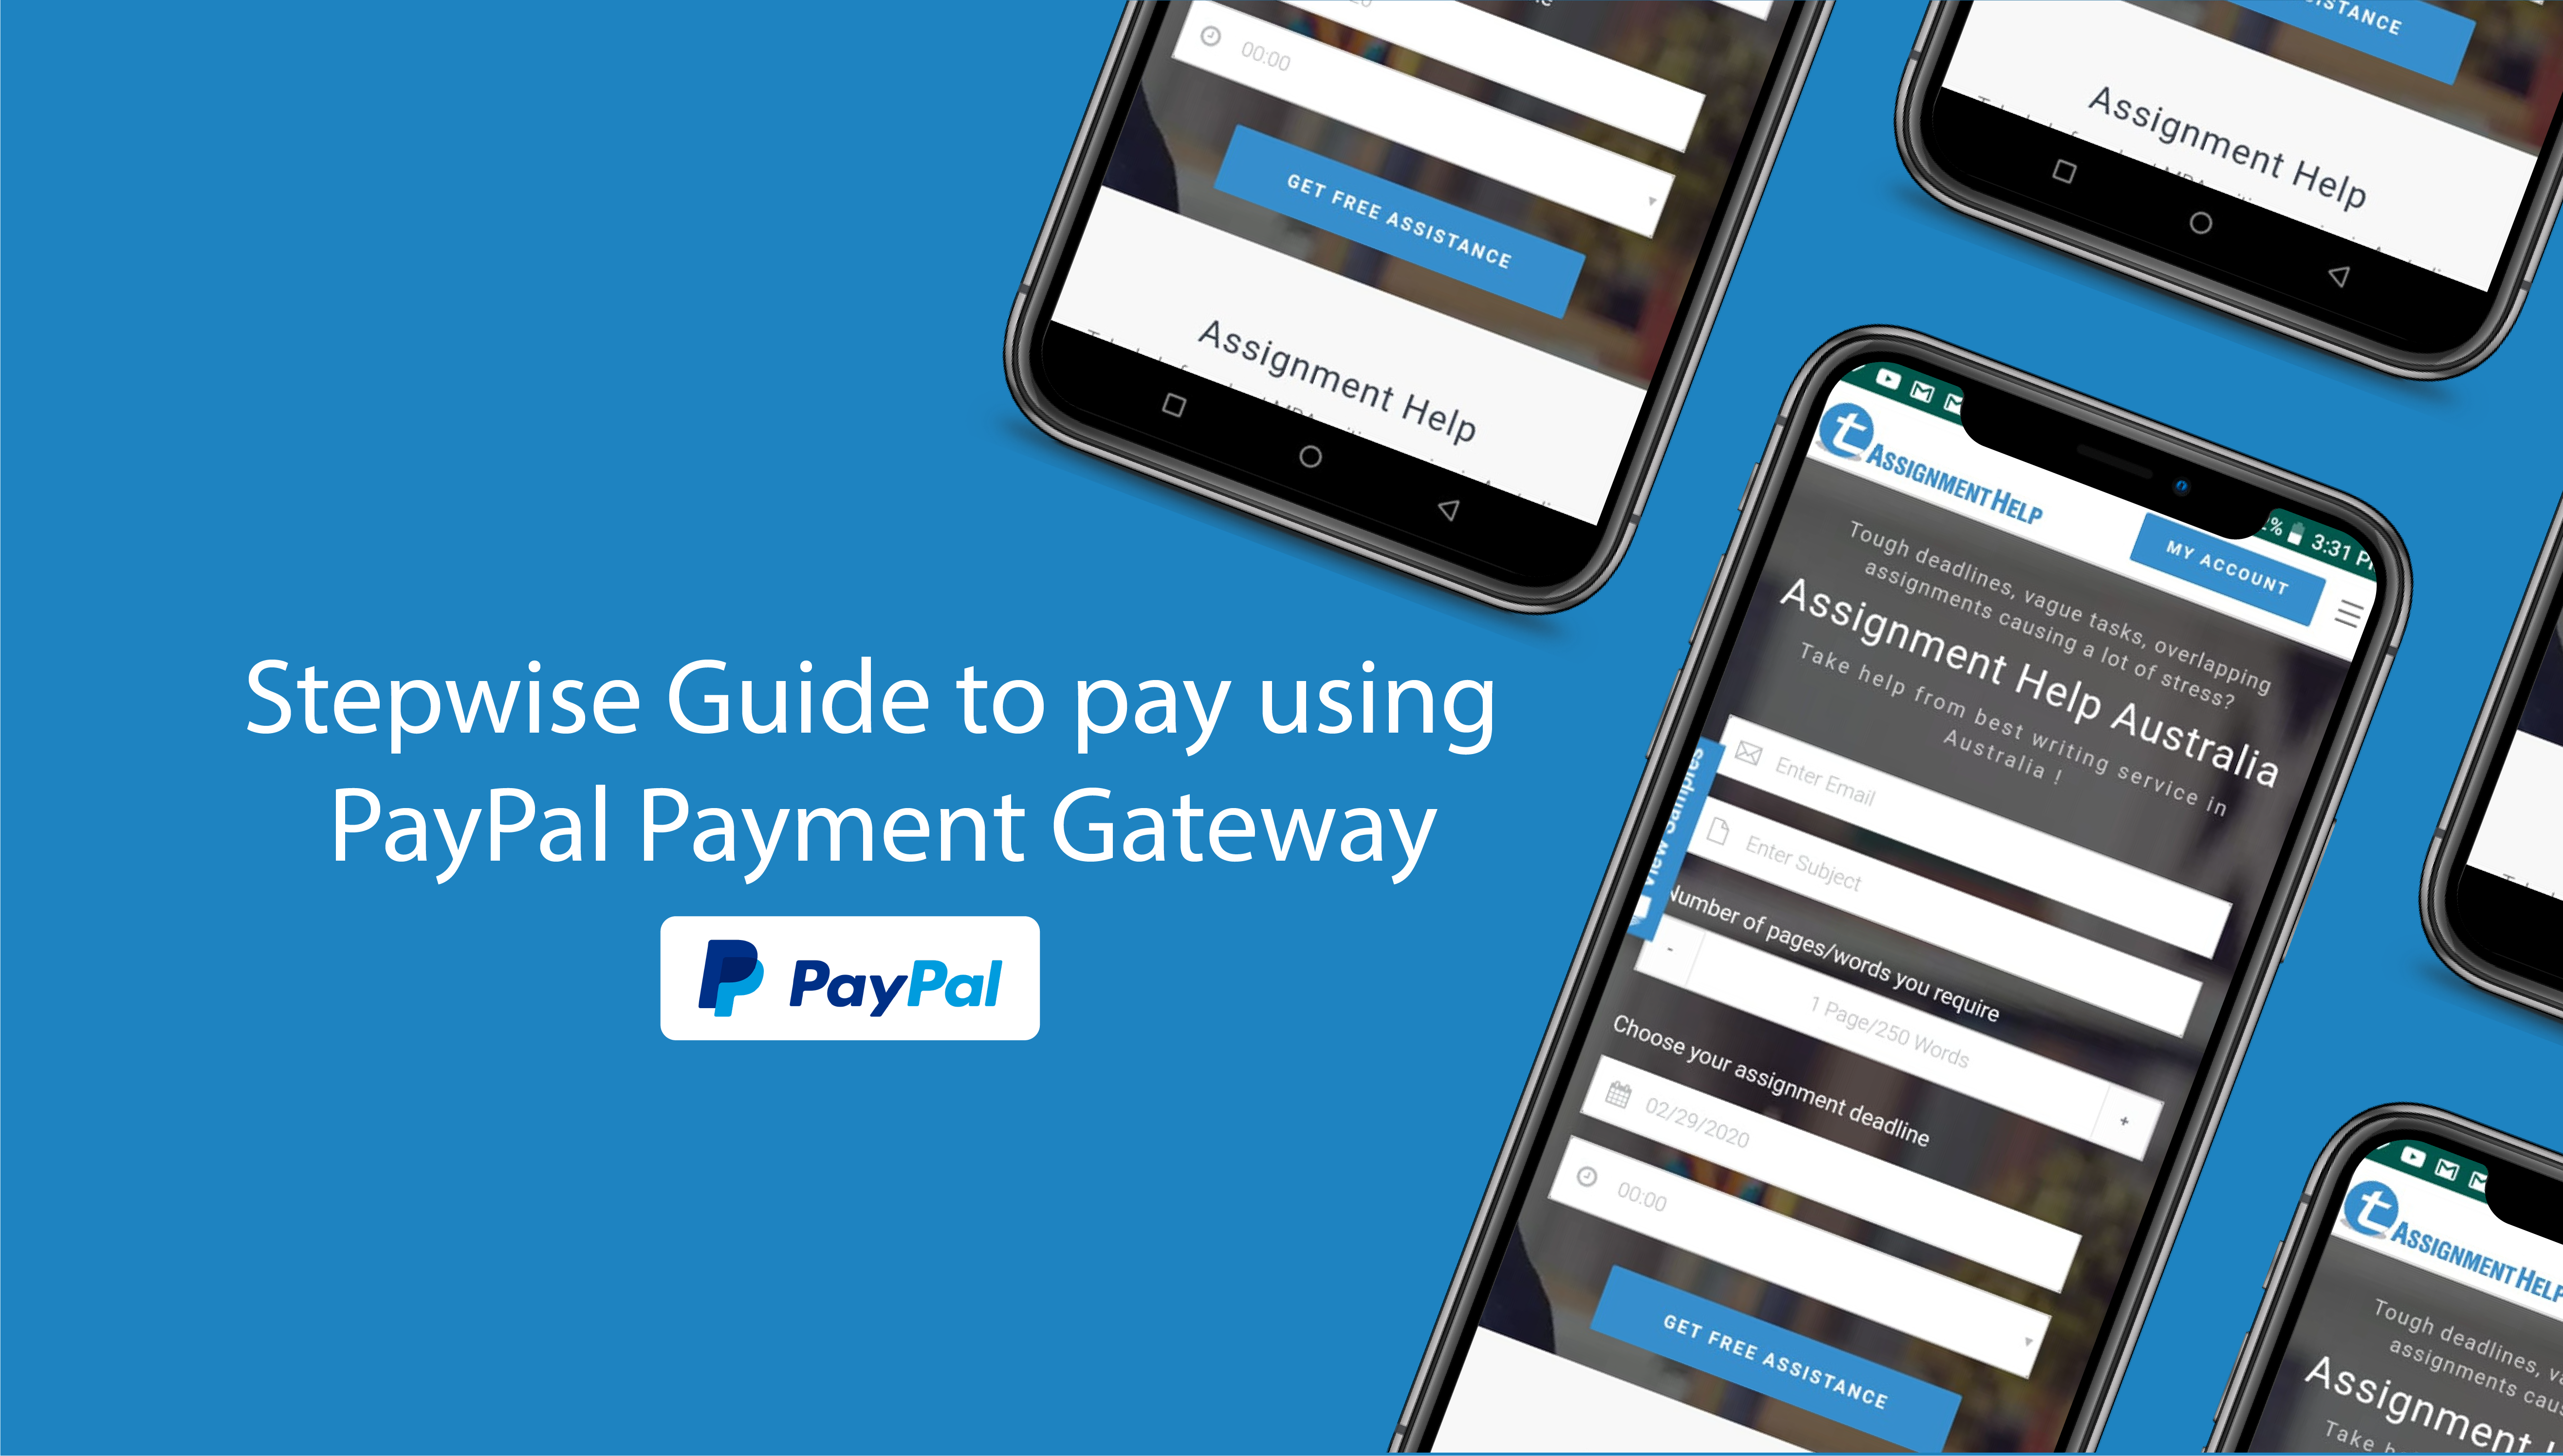 How to pay through PayPay?